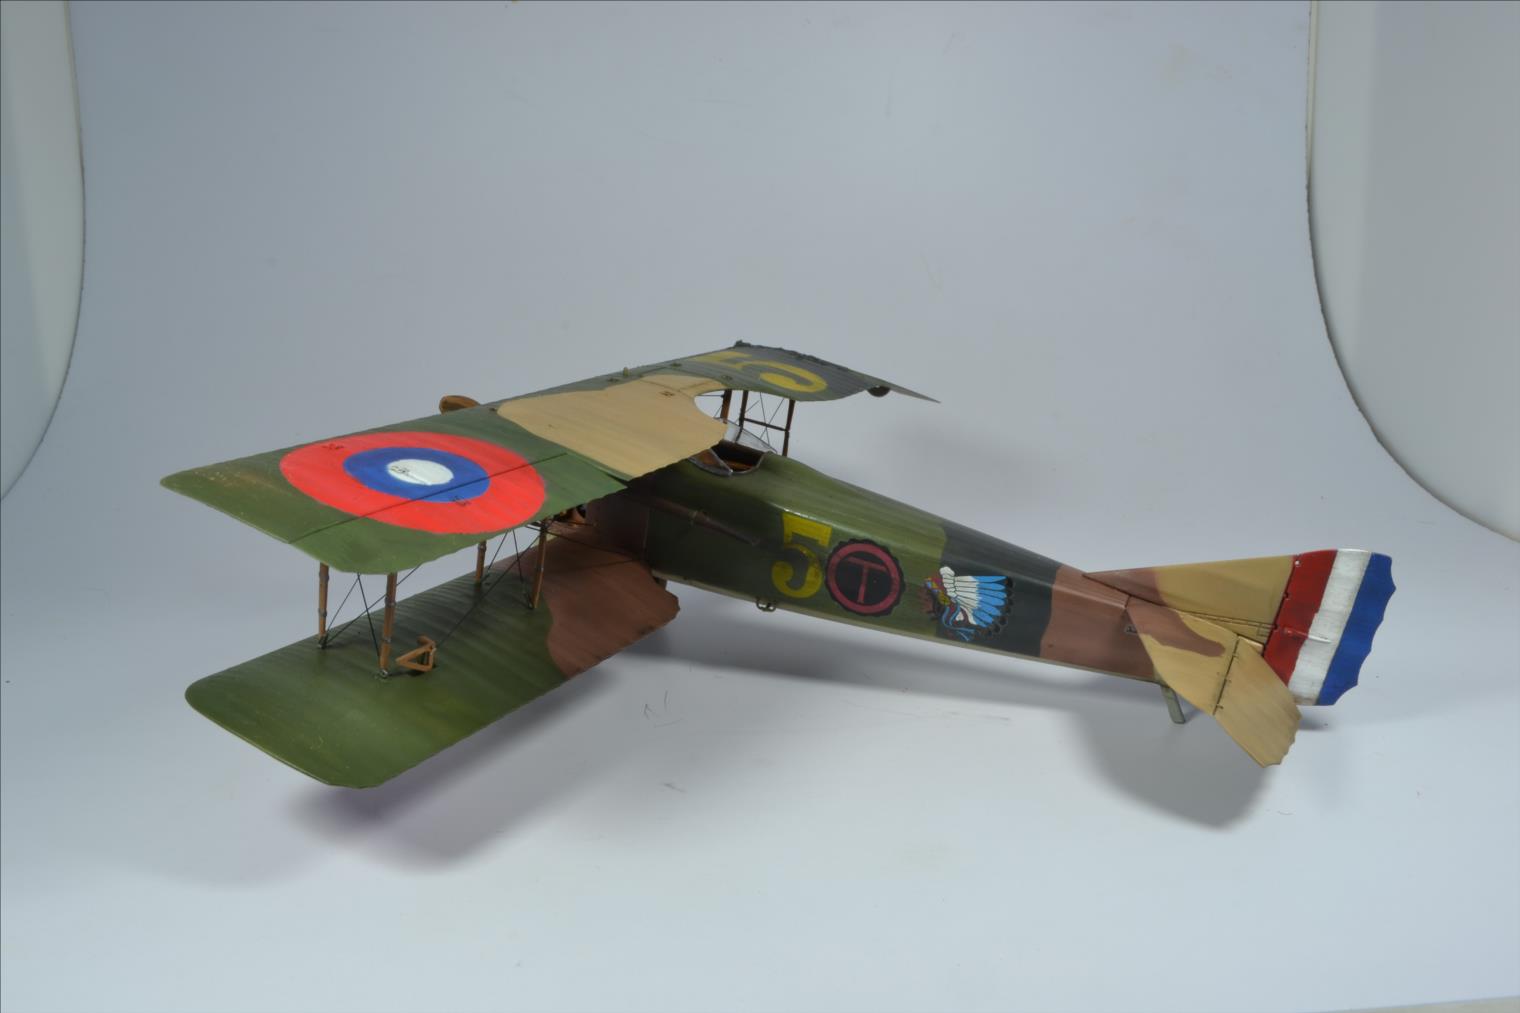 SPAD VIIc1 (RODEN 1/32) - Page 4 21032307592322494217331232